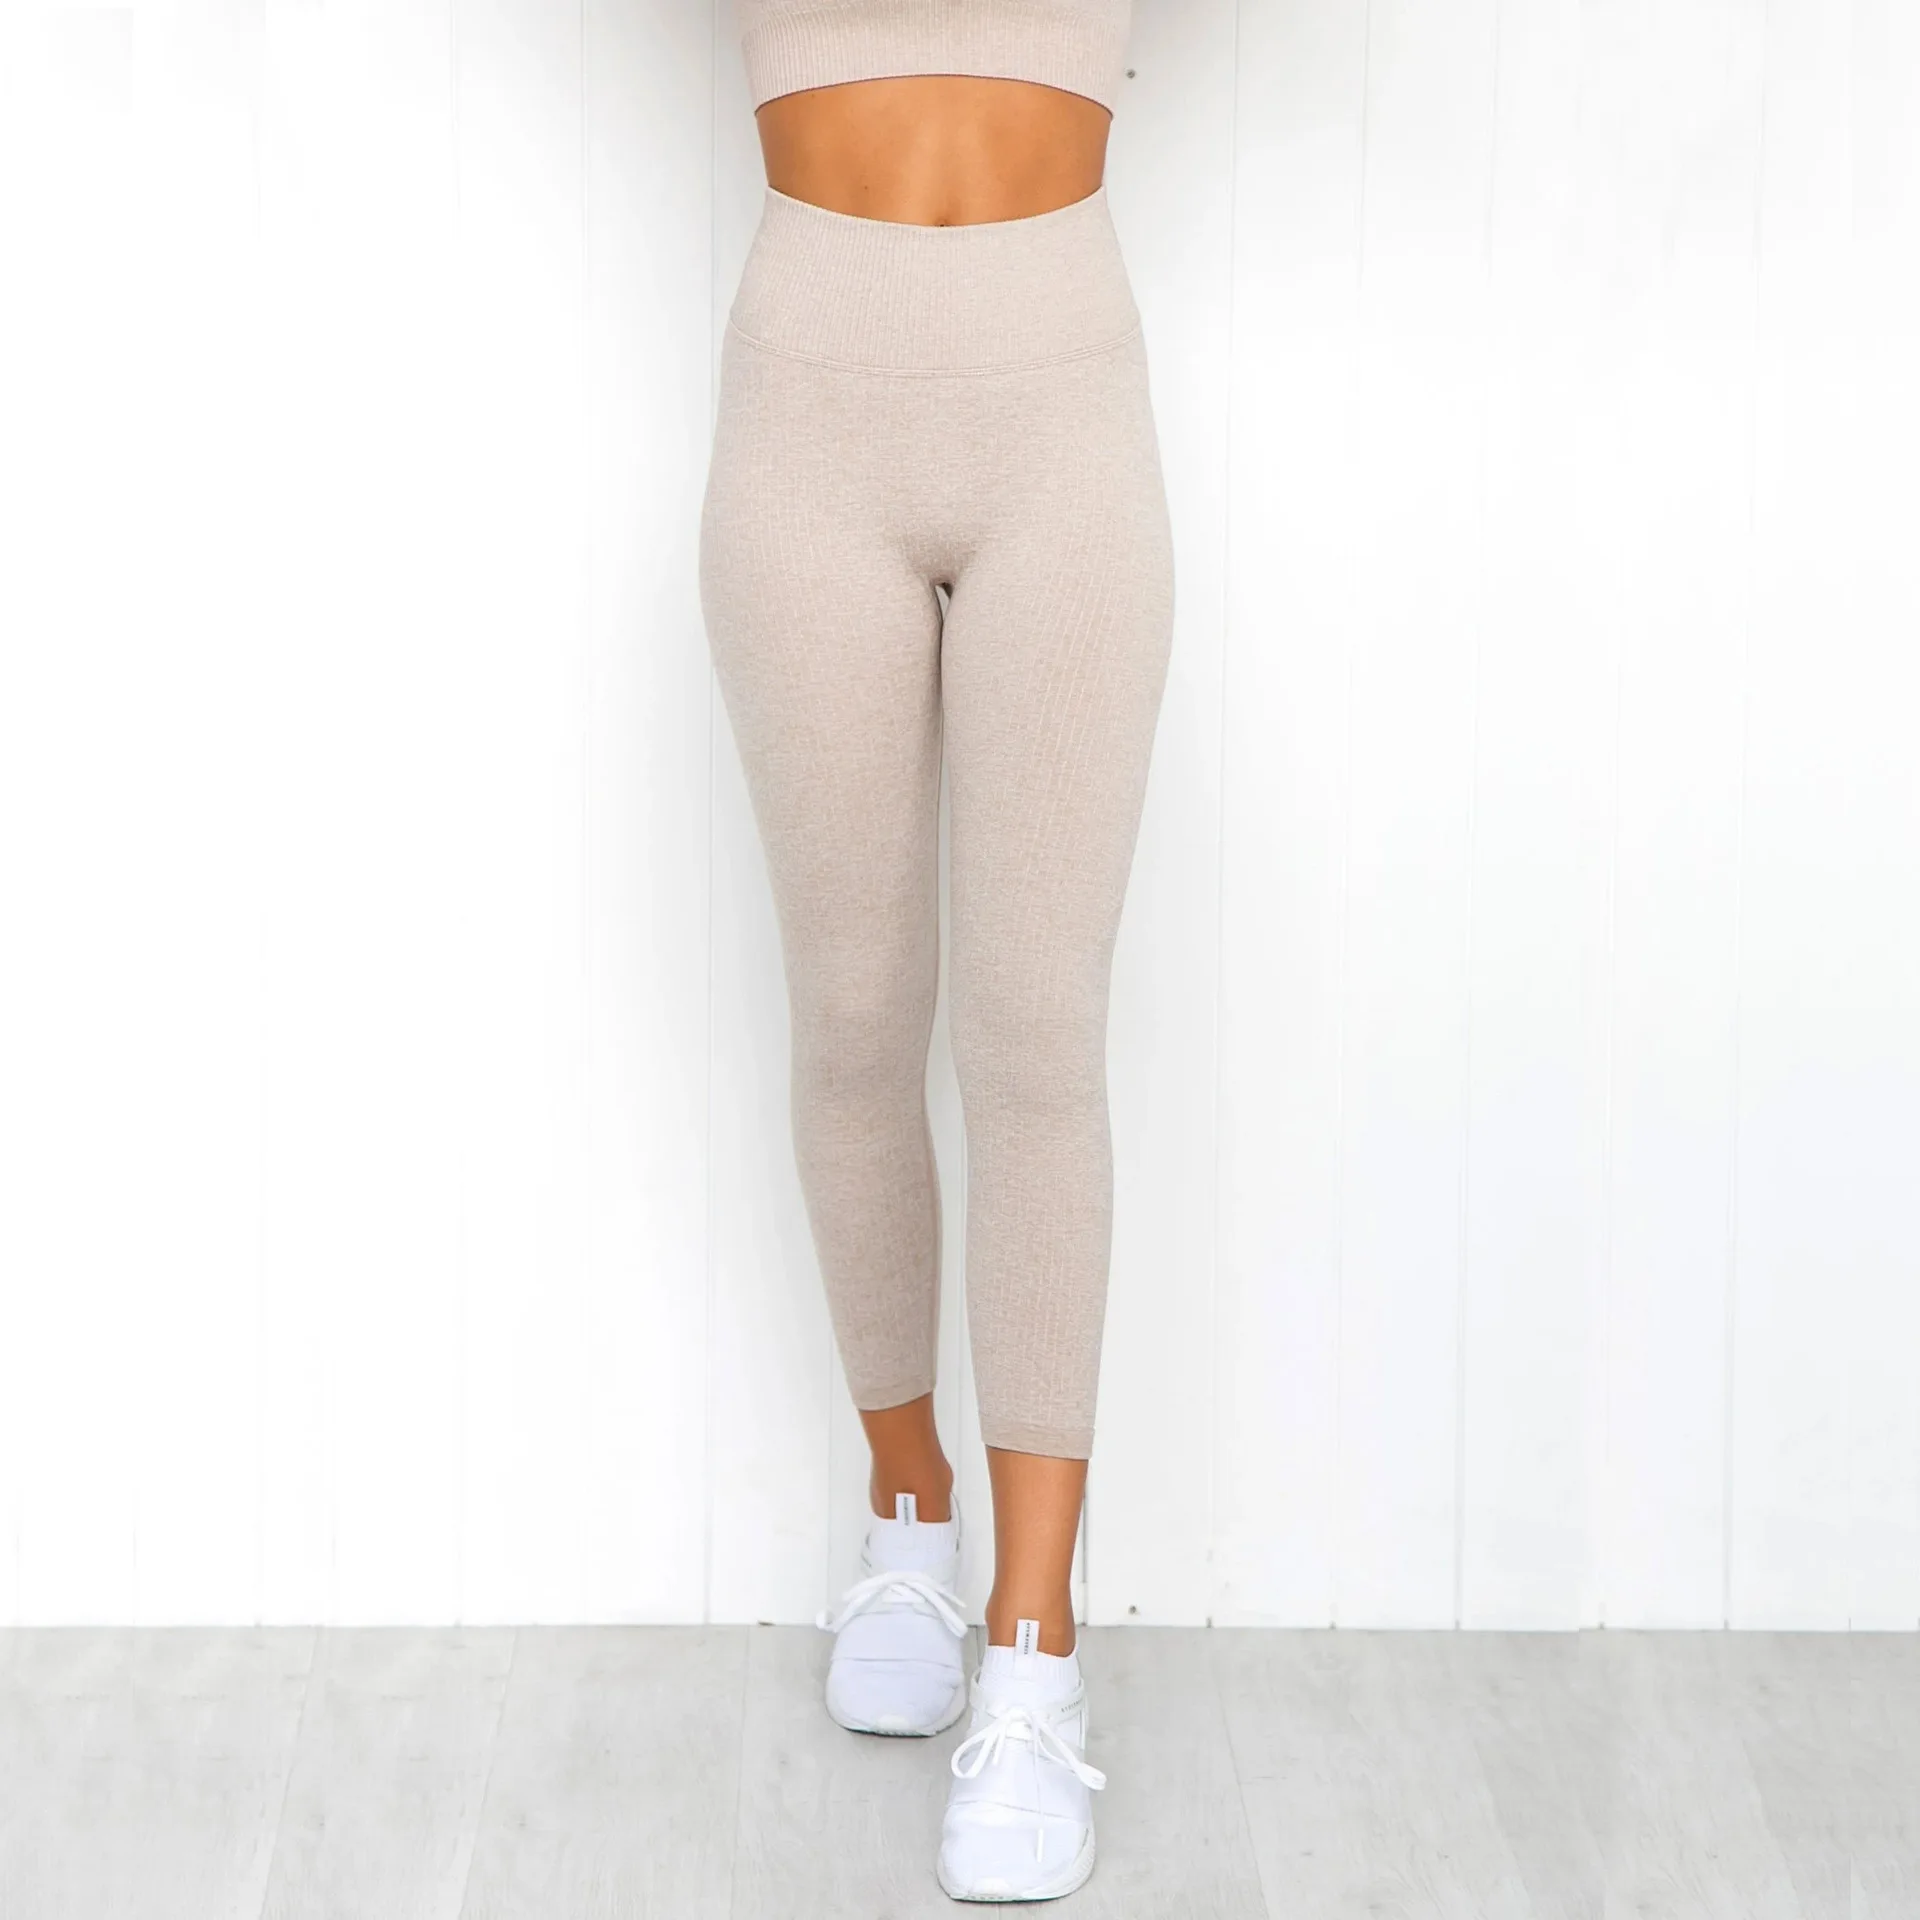 

2021 Sports Leggings Pants High Waist Stretchy Yoga Women Fitness Gym Tights Jogging Leggins Push Up Running Workout Trousers